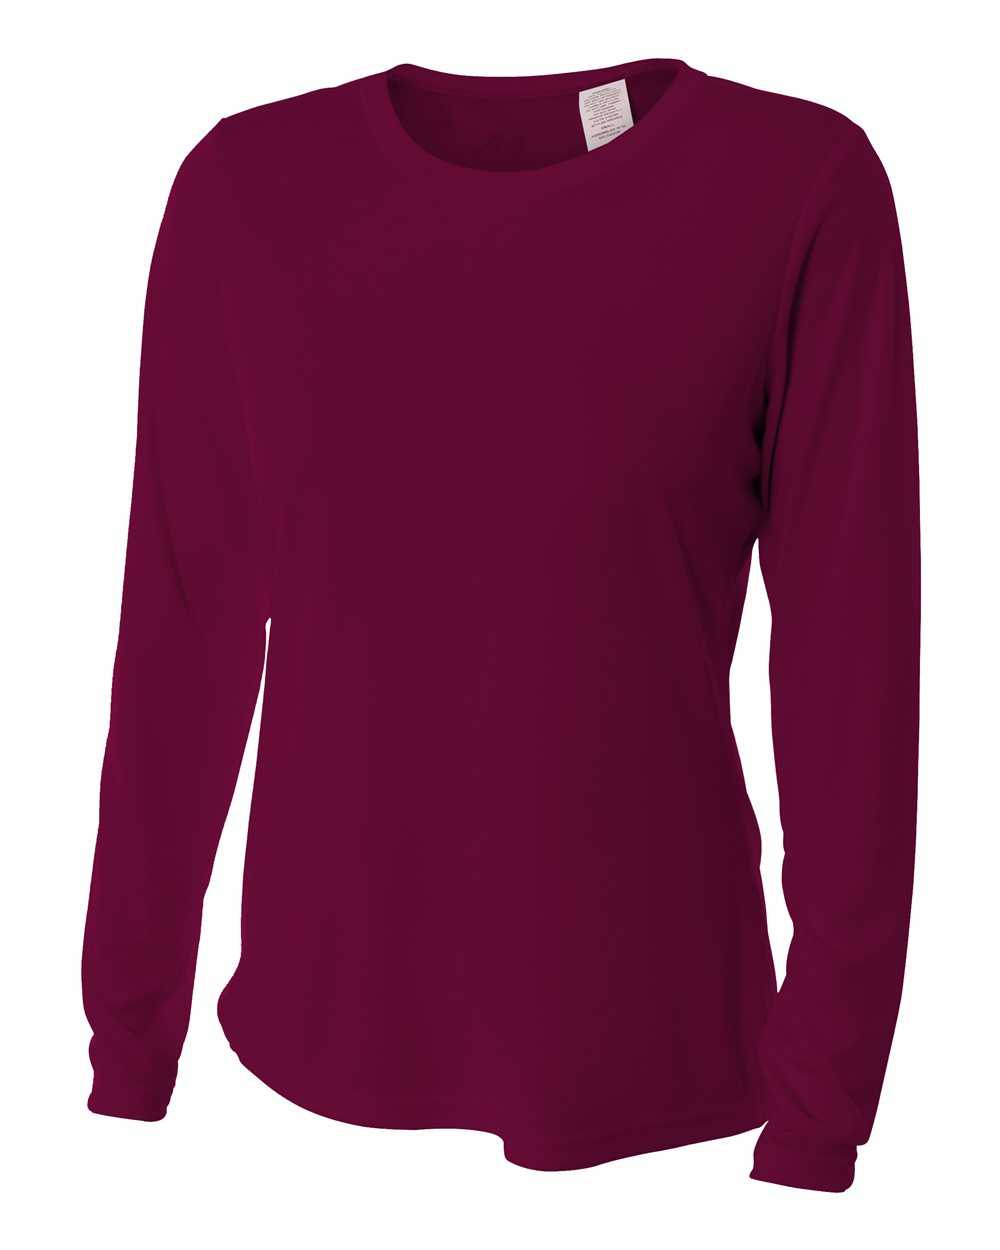 A4 NW3002 Women's Long Sleeve Performance Crew - Maroon - HIT a Double